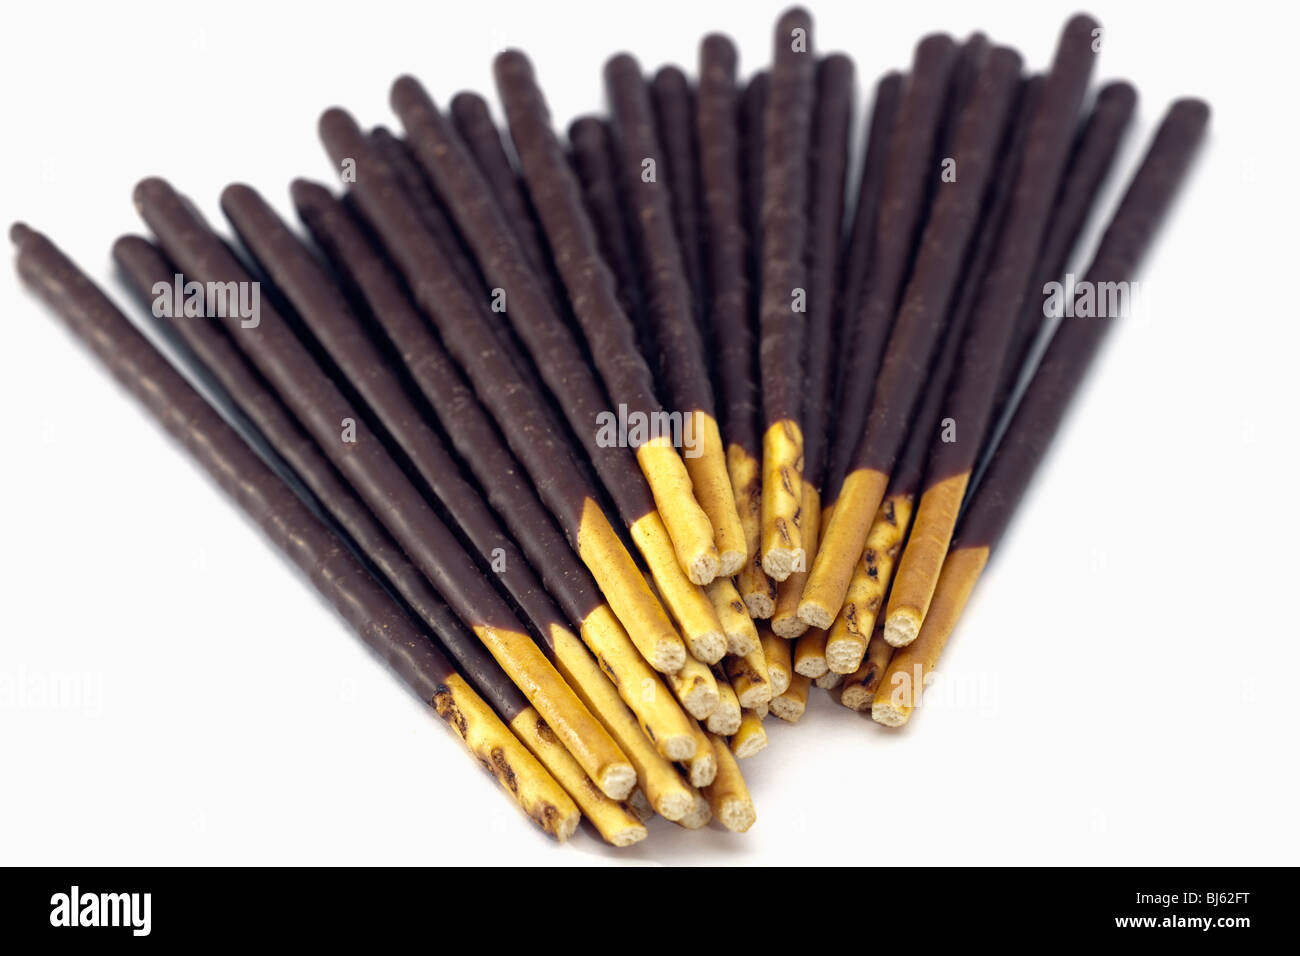 Pile of biscuit sticks dipped in dark chocolate Stock Photo